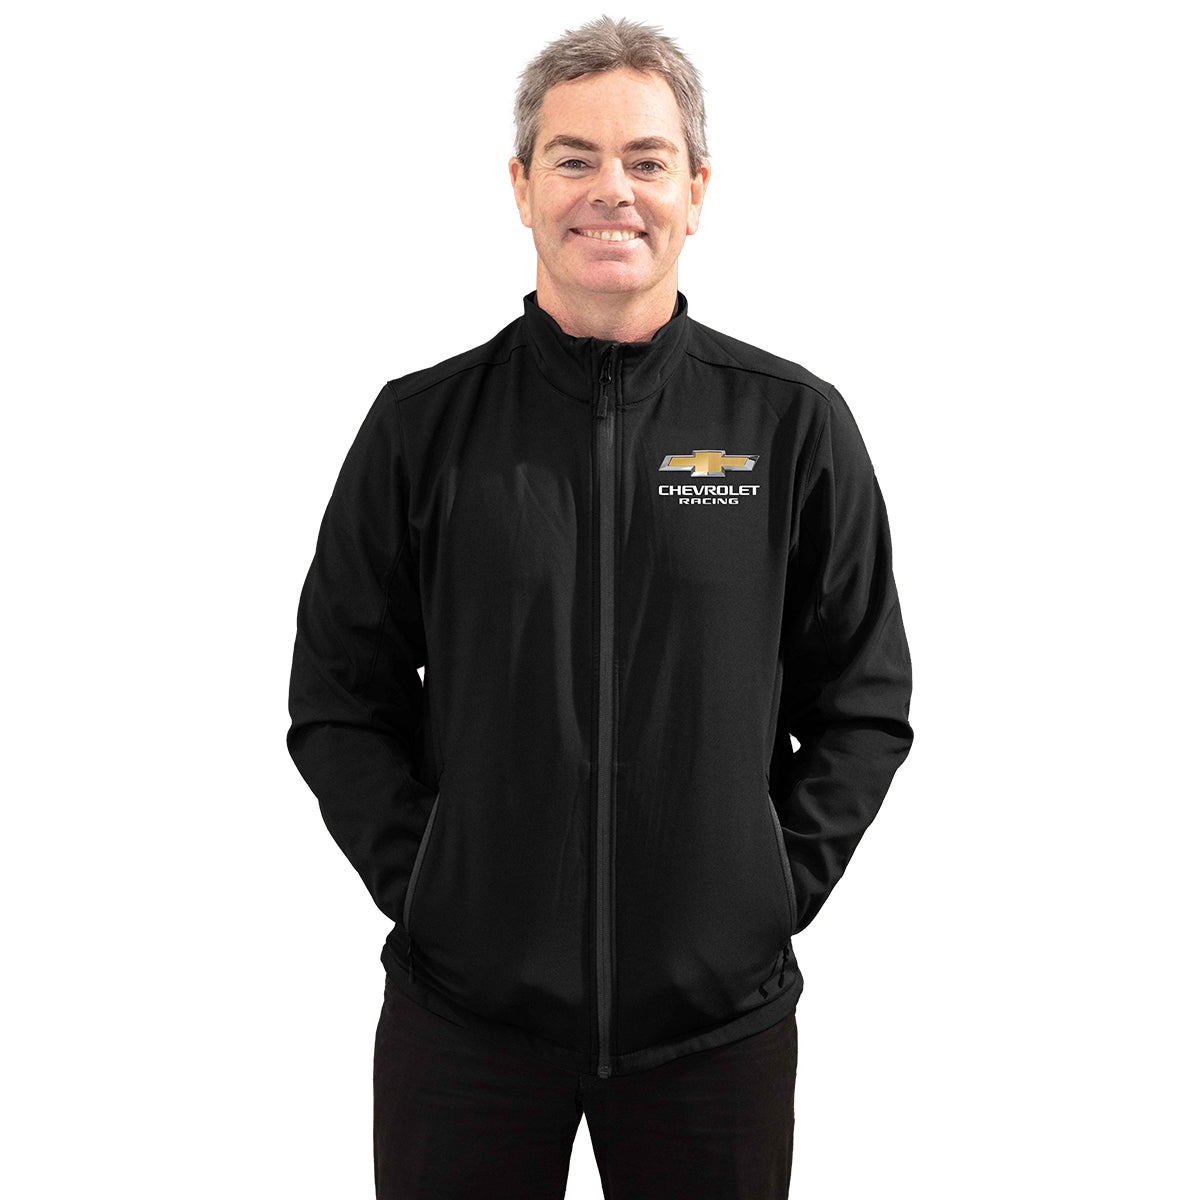 Chevrolet Racing Outerwear Jacket